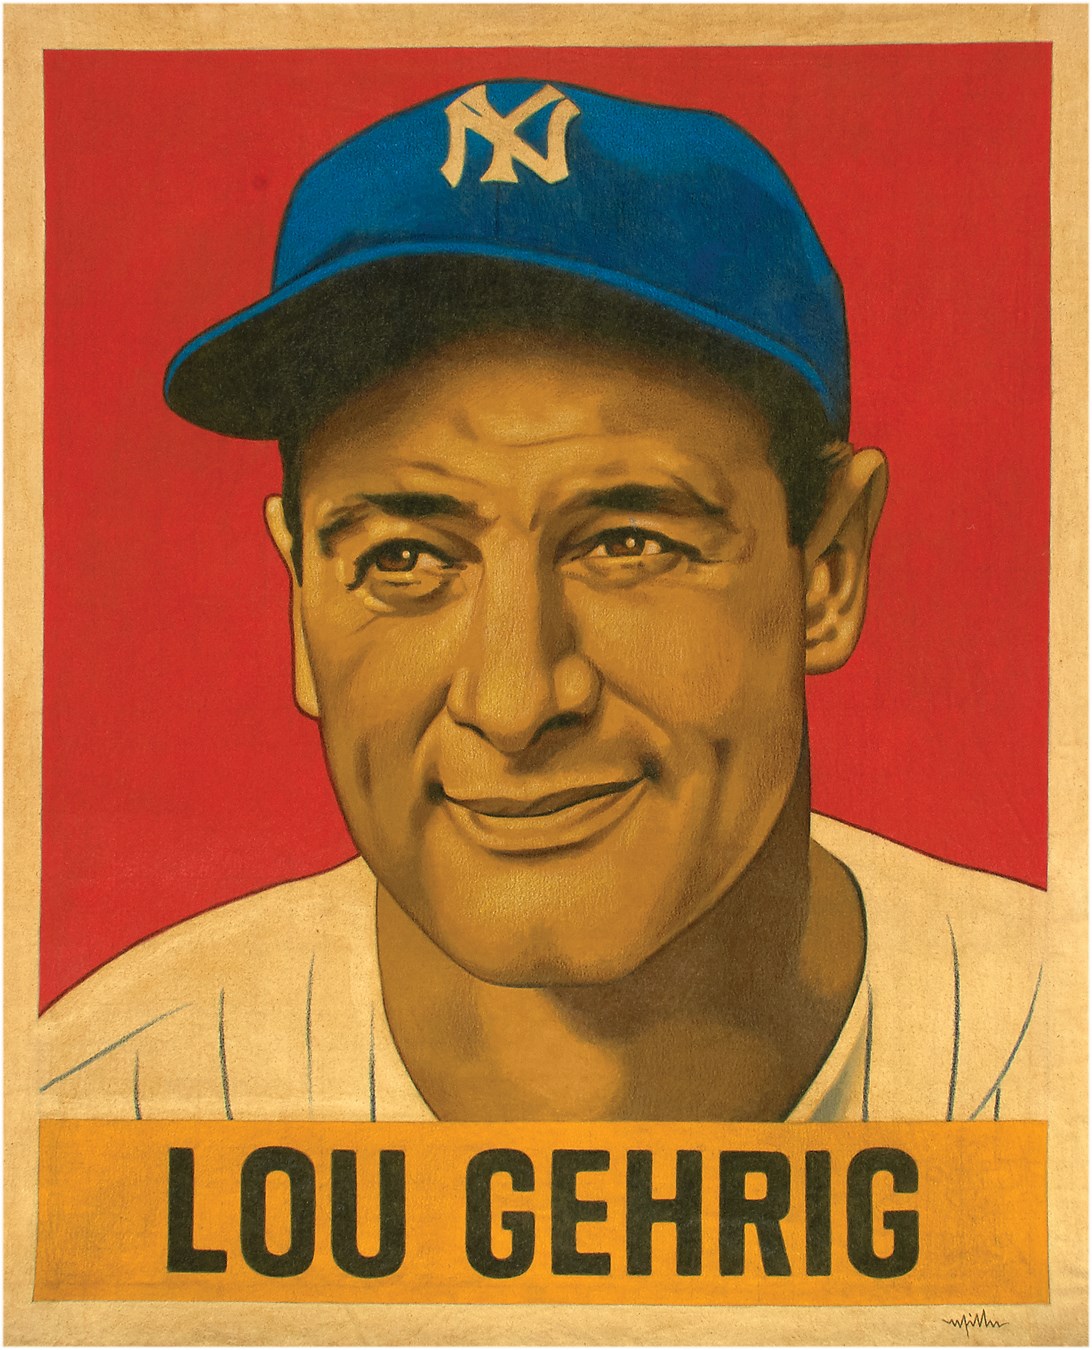 Sports Fine Art - “A Card That Never Was: LOU GEHRIG (1948 Leaf)